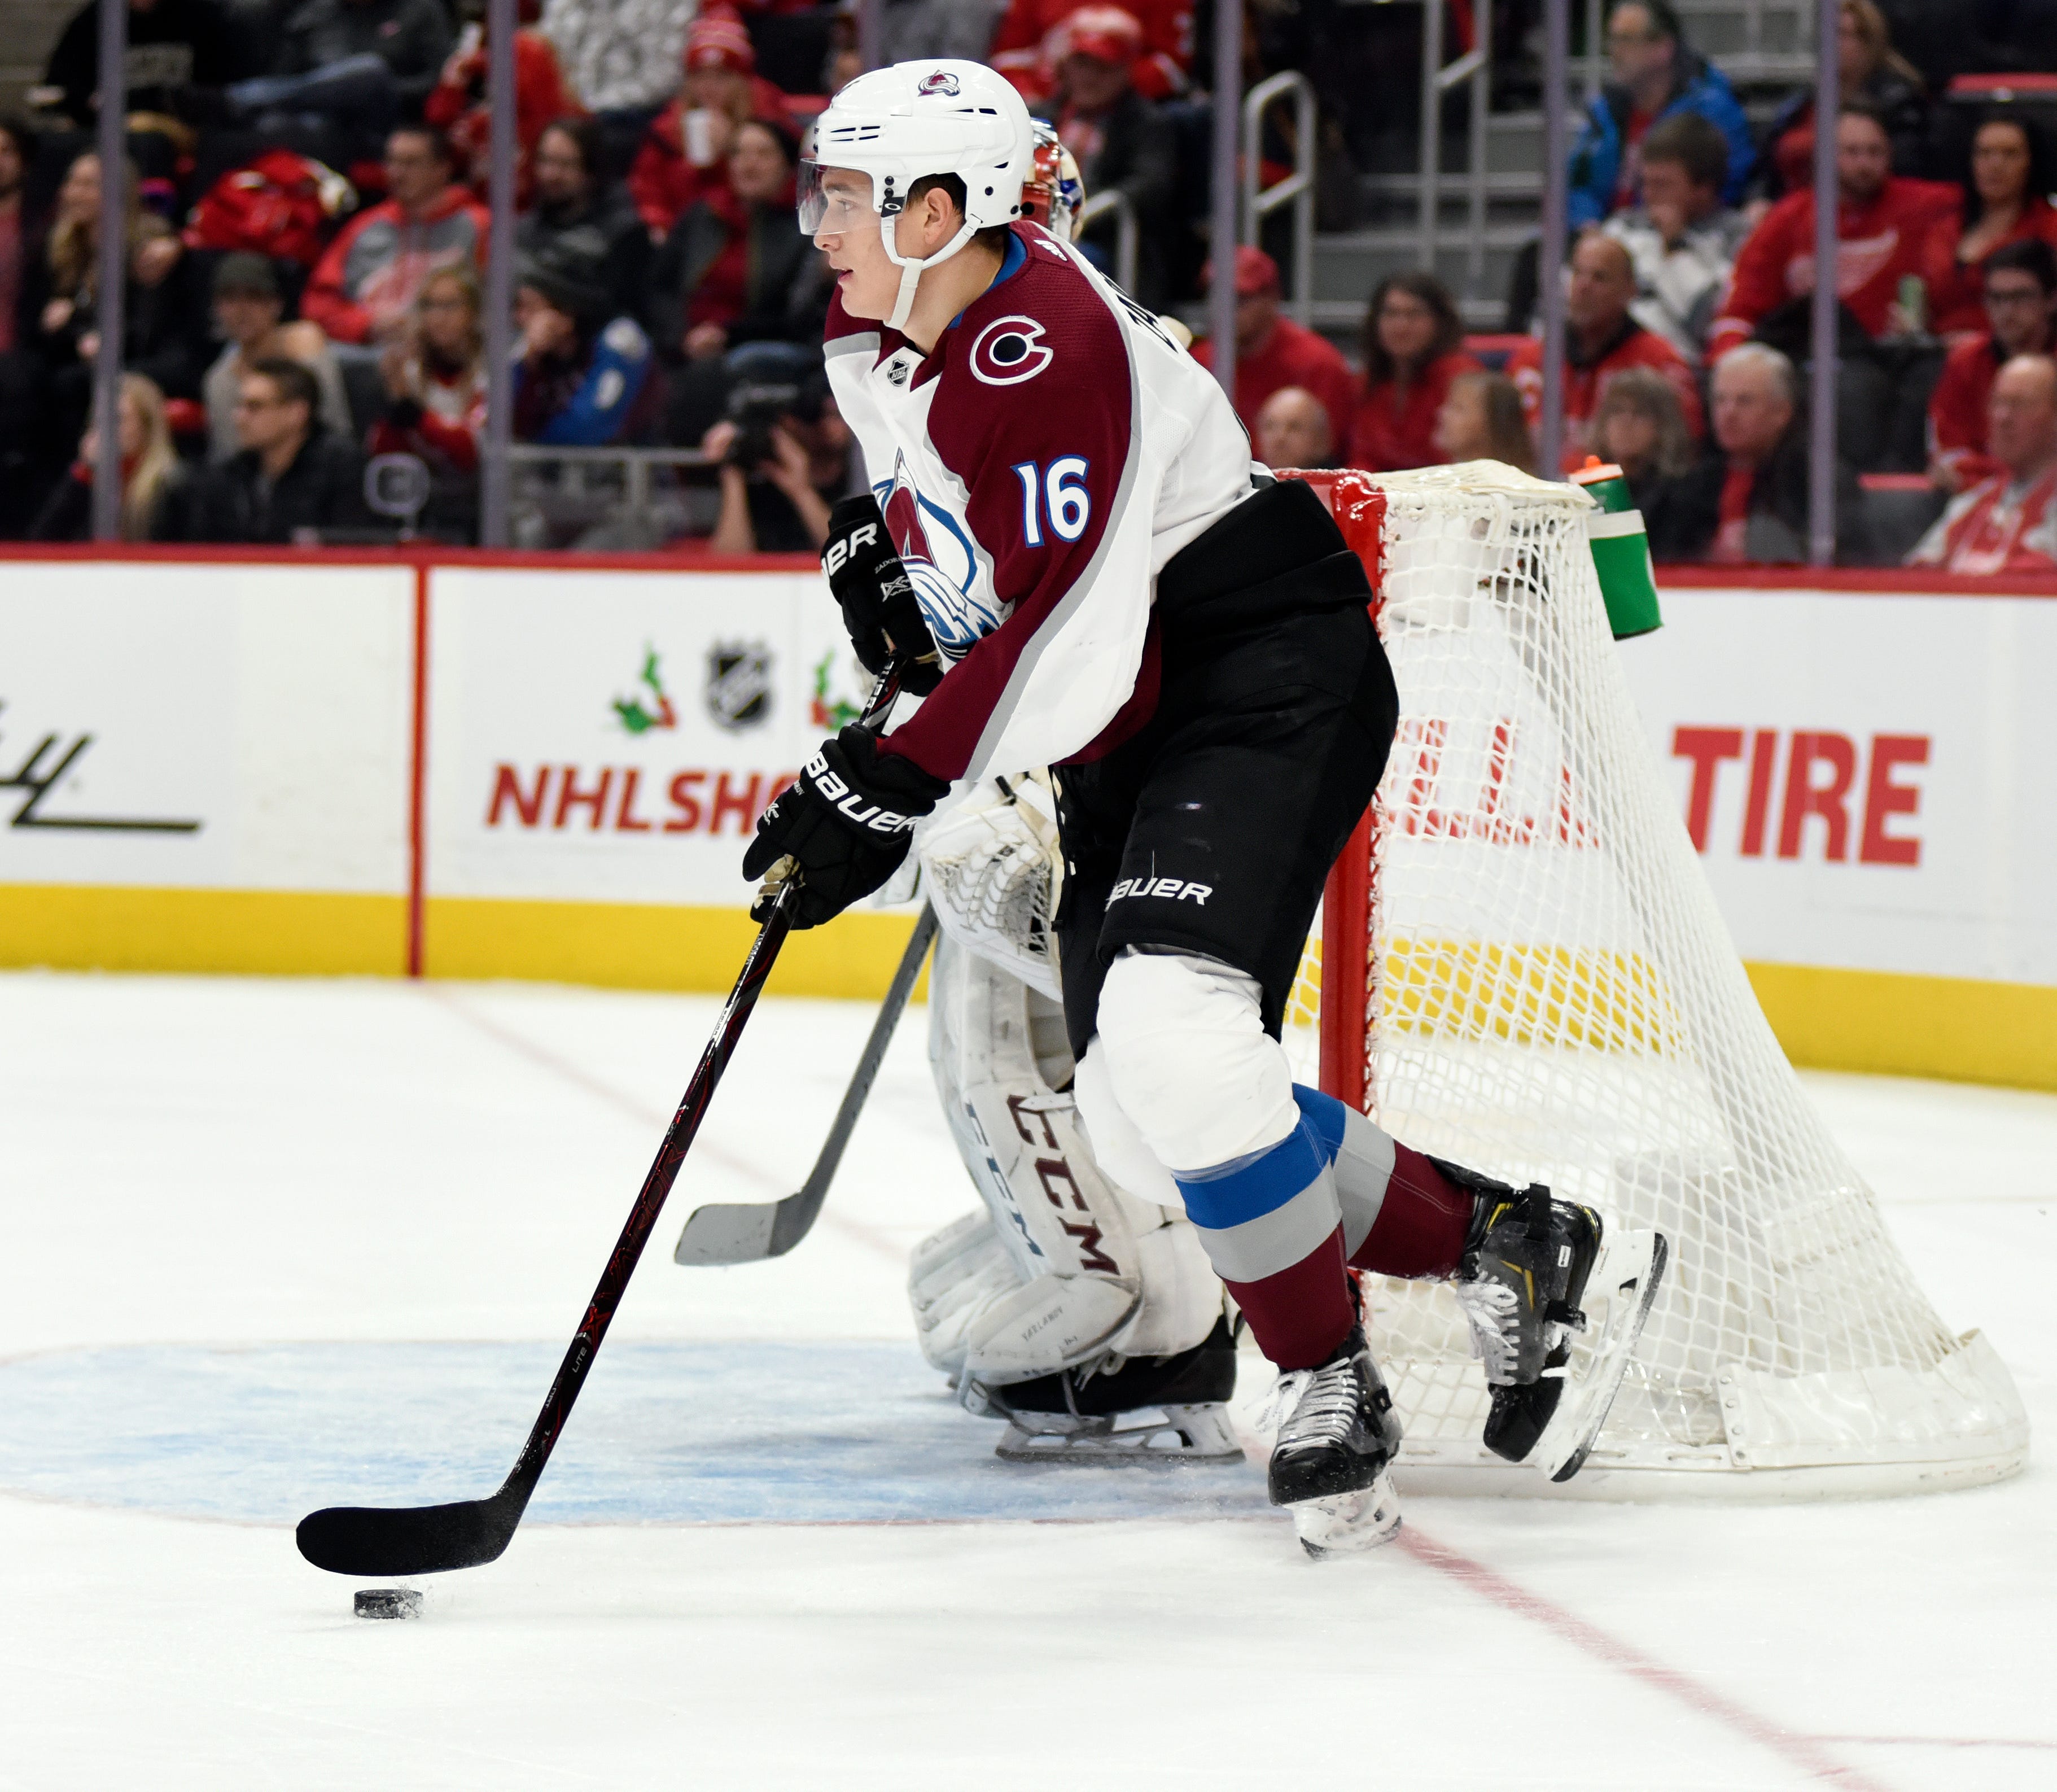 Avalanche defenseman Nikita Zadorov moves the puck up ice against the Red Wings during the second period.